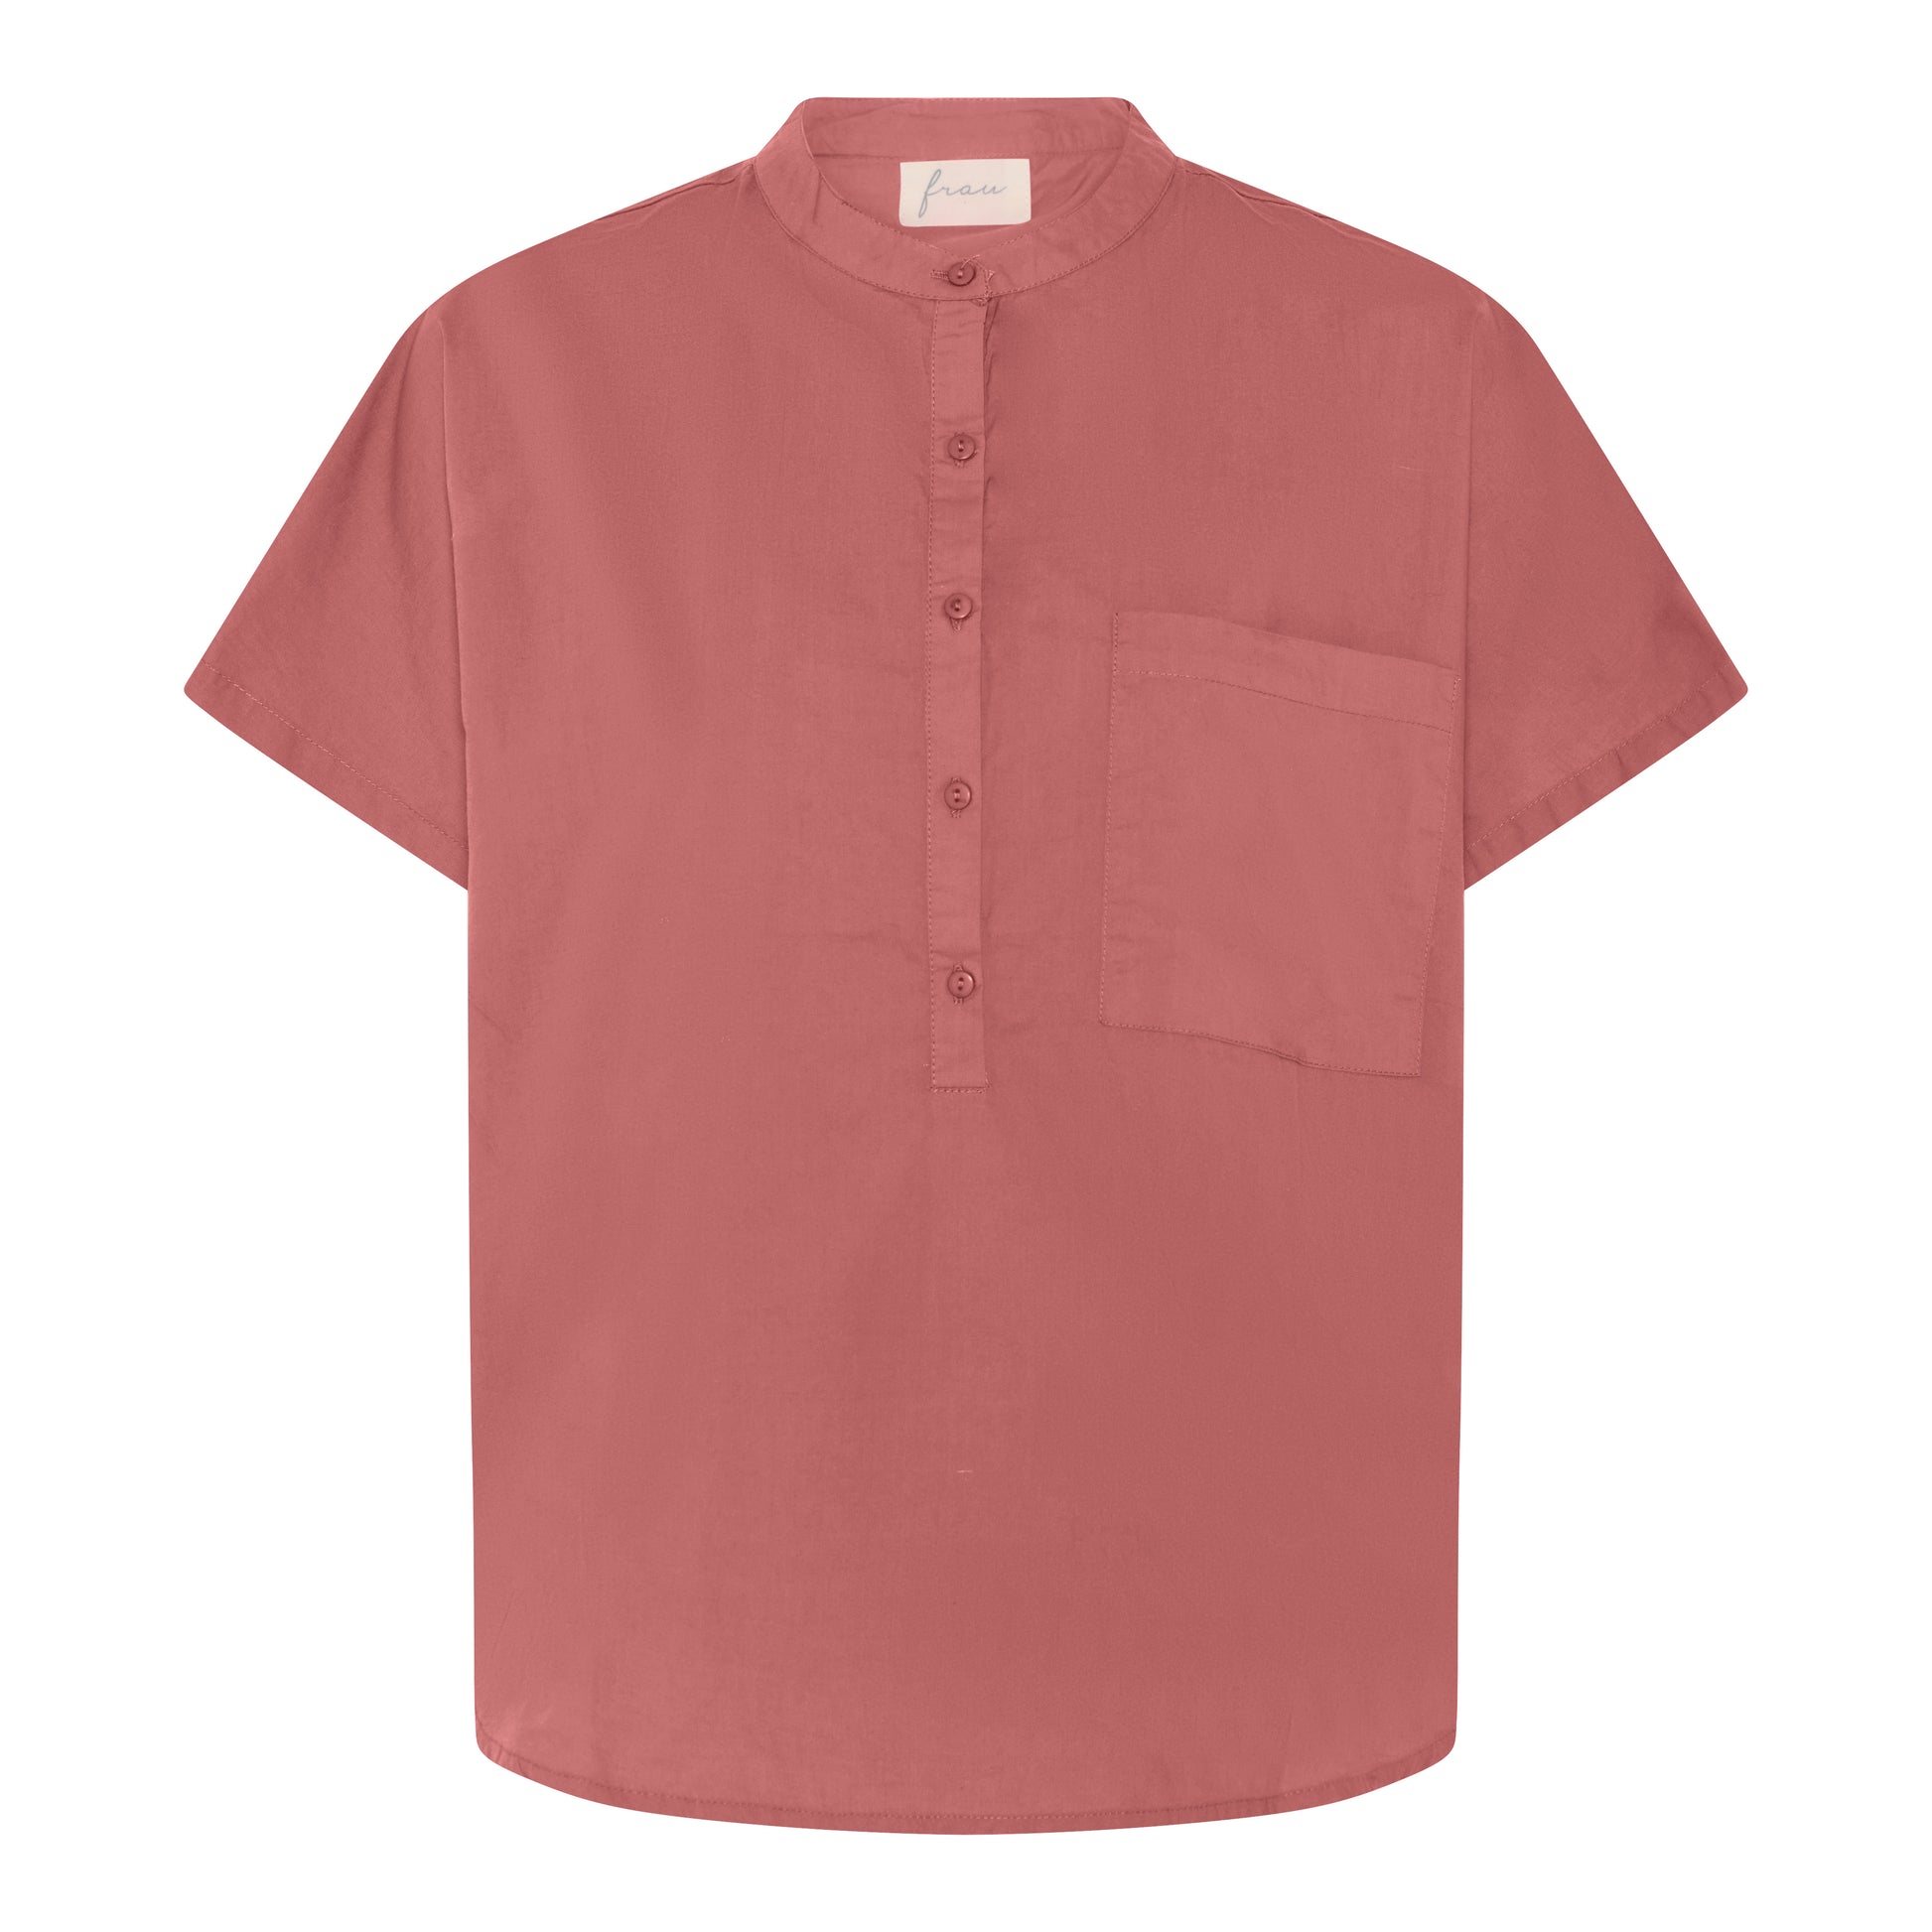 Colombo SS Top Ash Rose